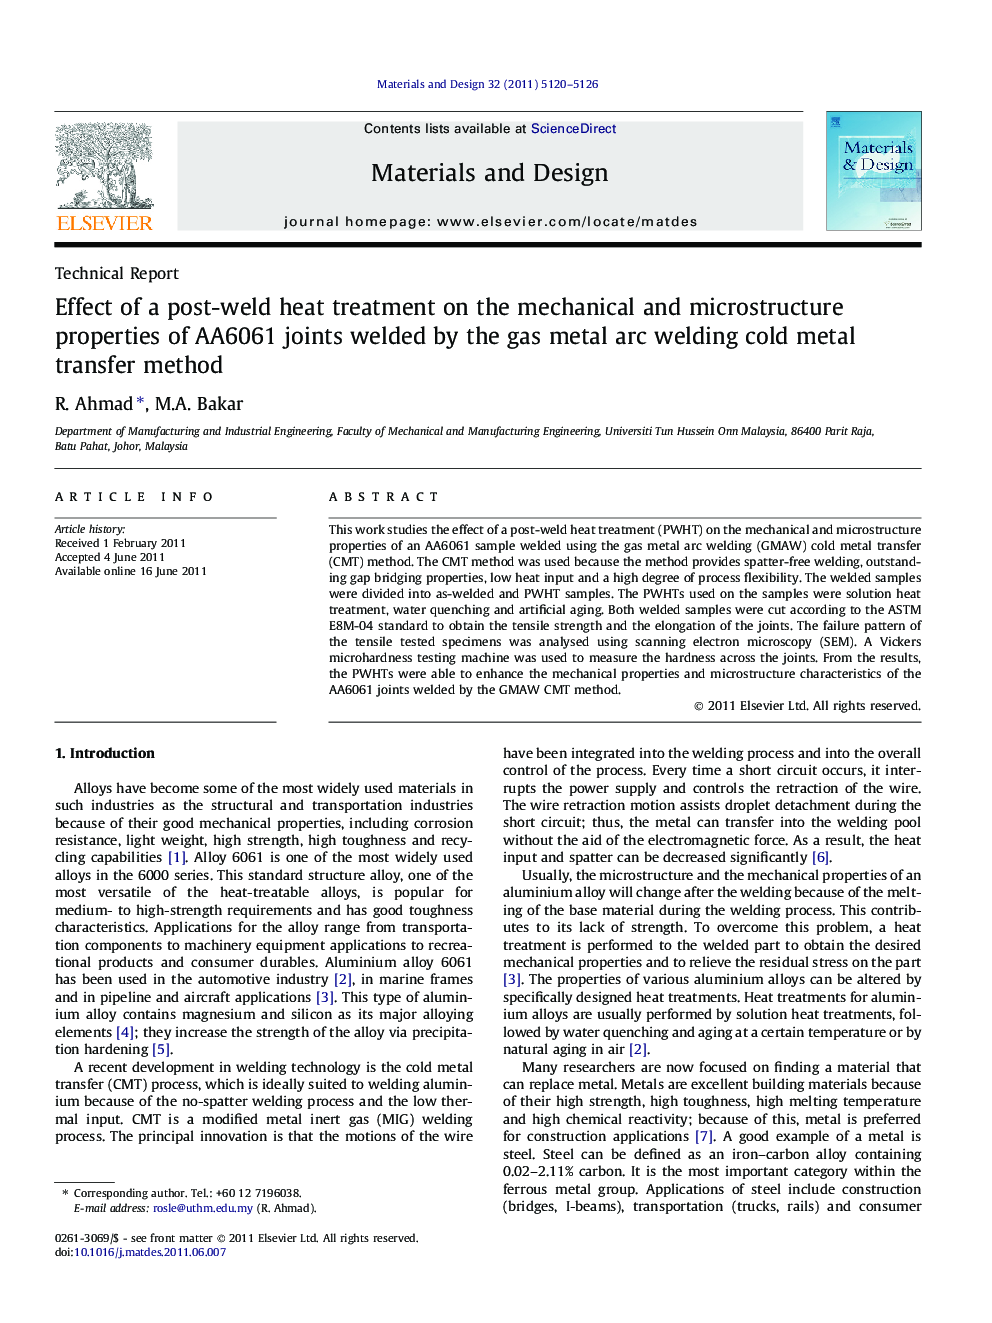 Effect of a post-weld heat treatment on the mechanical and microstructure properties of AA6061 joints welded by the gas metal arc welding cold metal transfer method